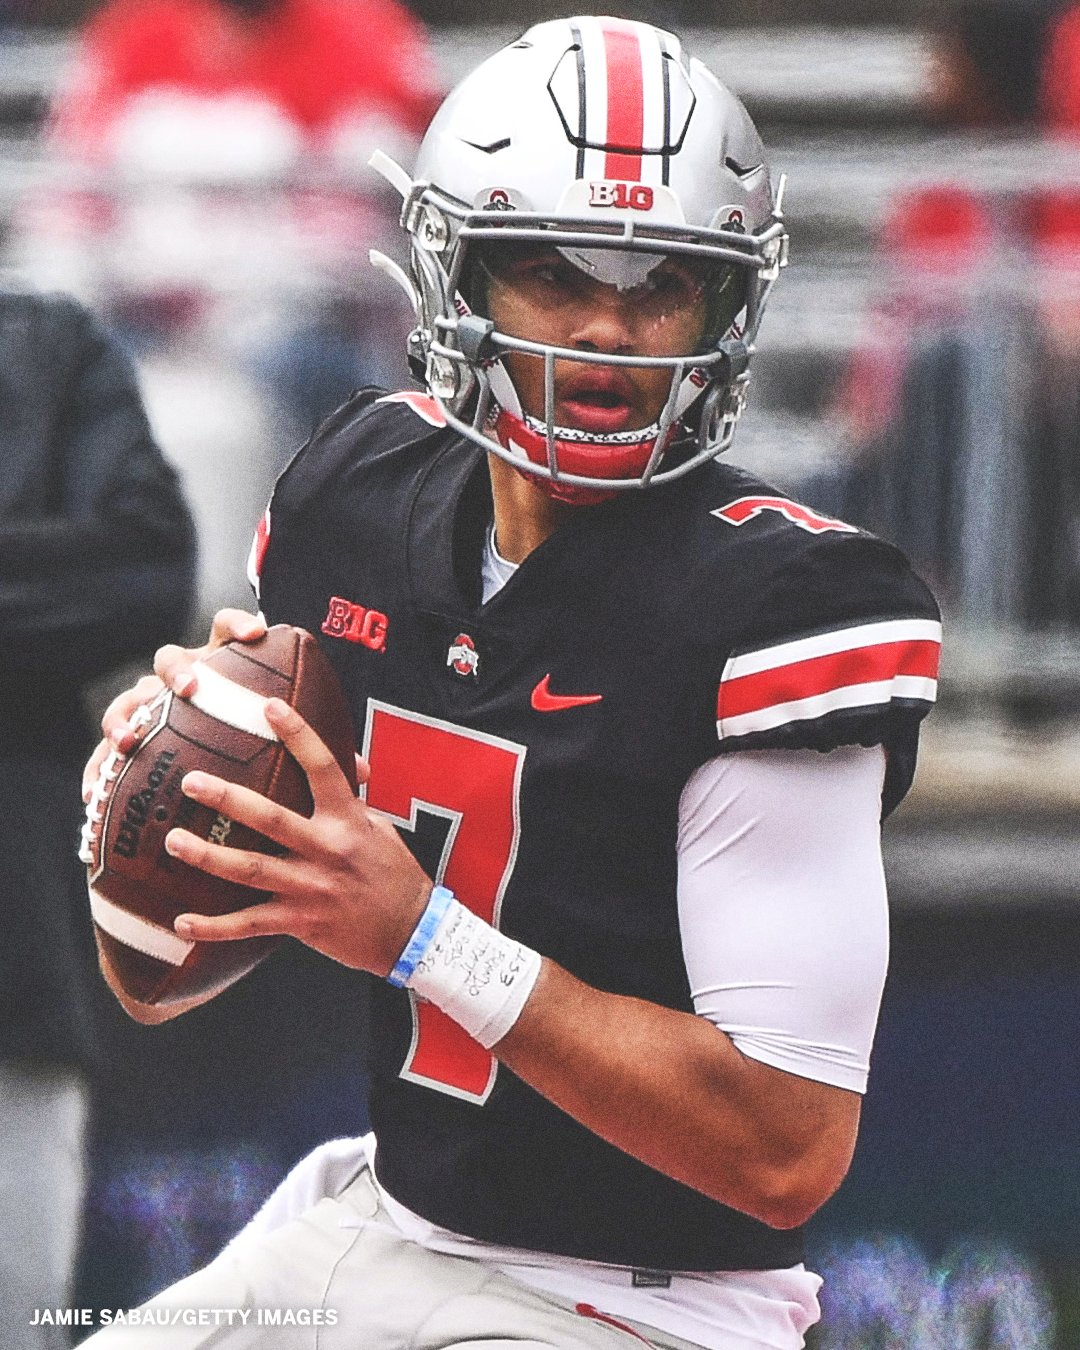 ESPN College Football State QB C.J. Stroud has been named the Buckeyes' starter for the Sept. 2 season opener at Minnesota, coach Ryan Day said Saturday. More ➡